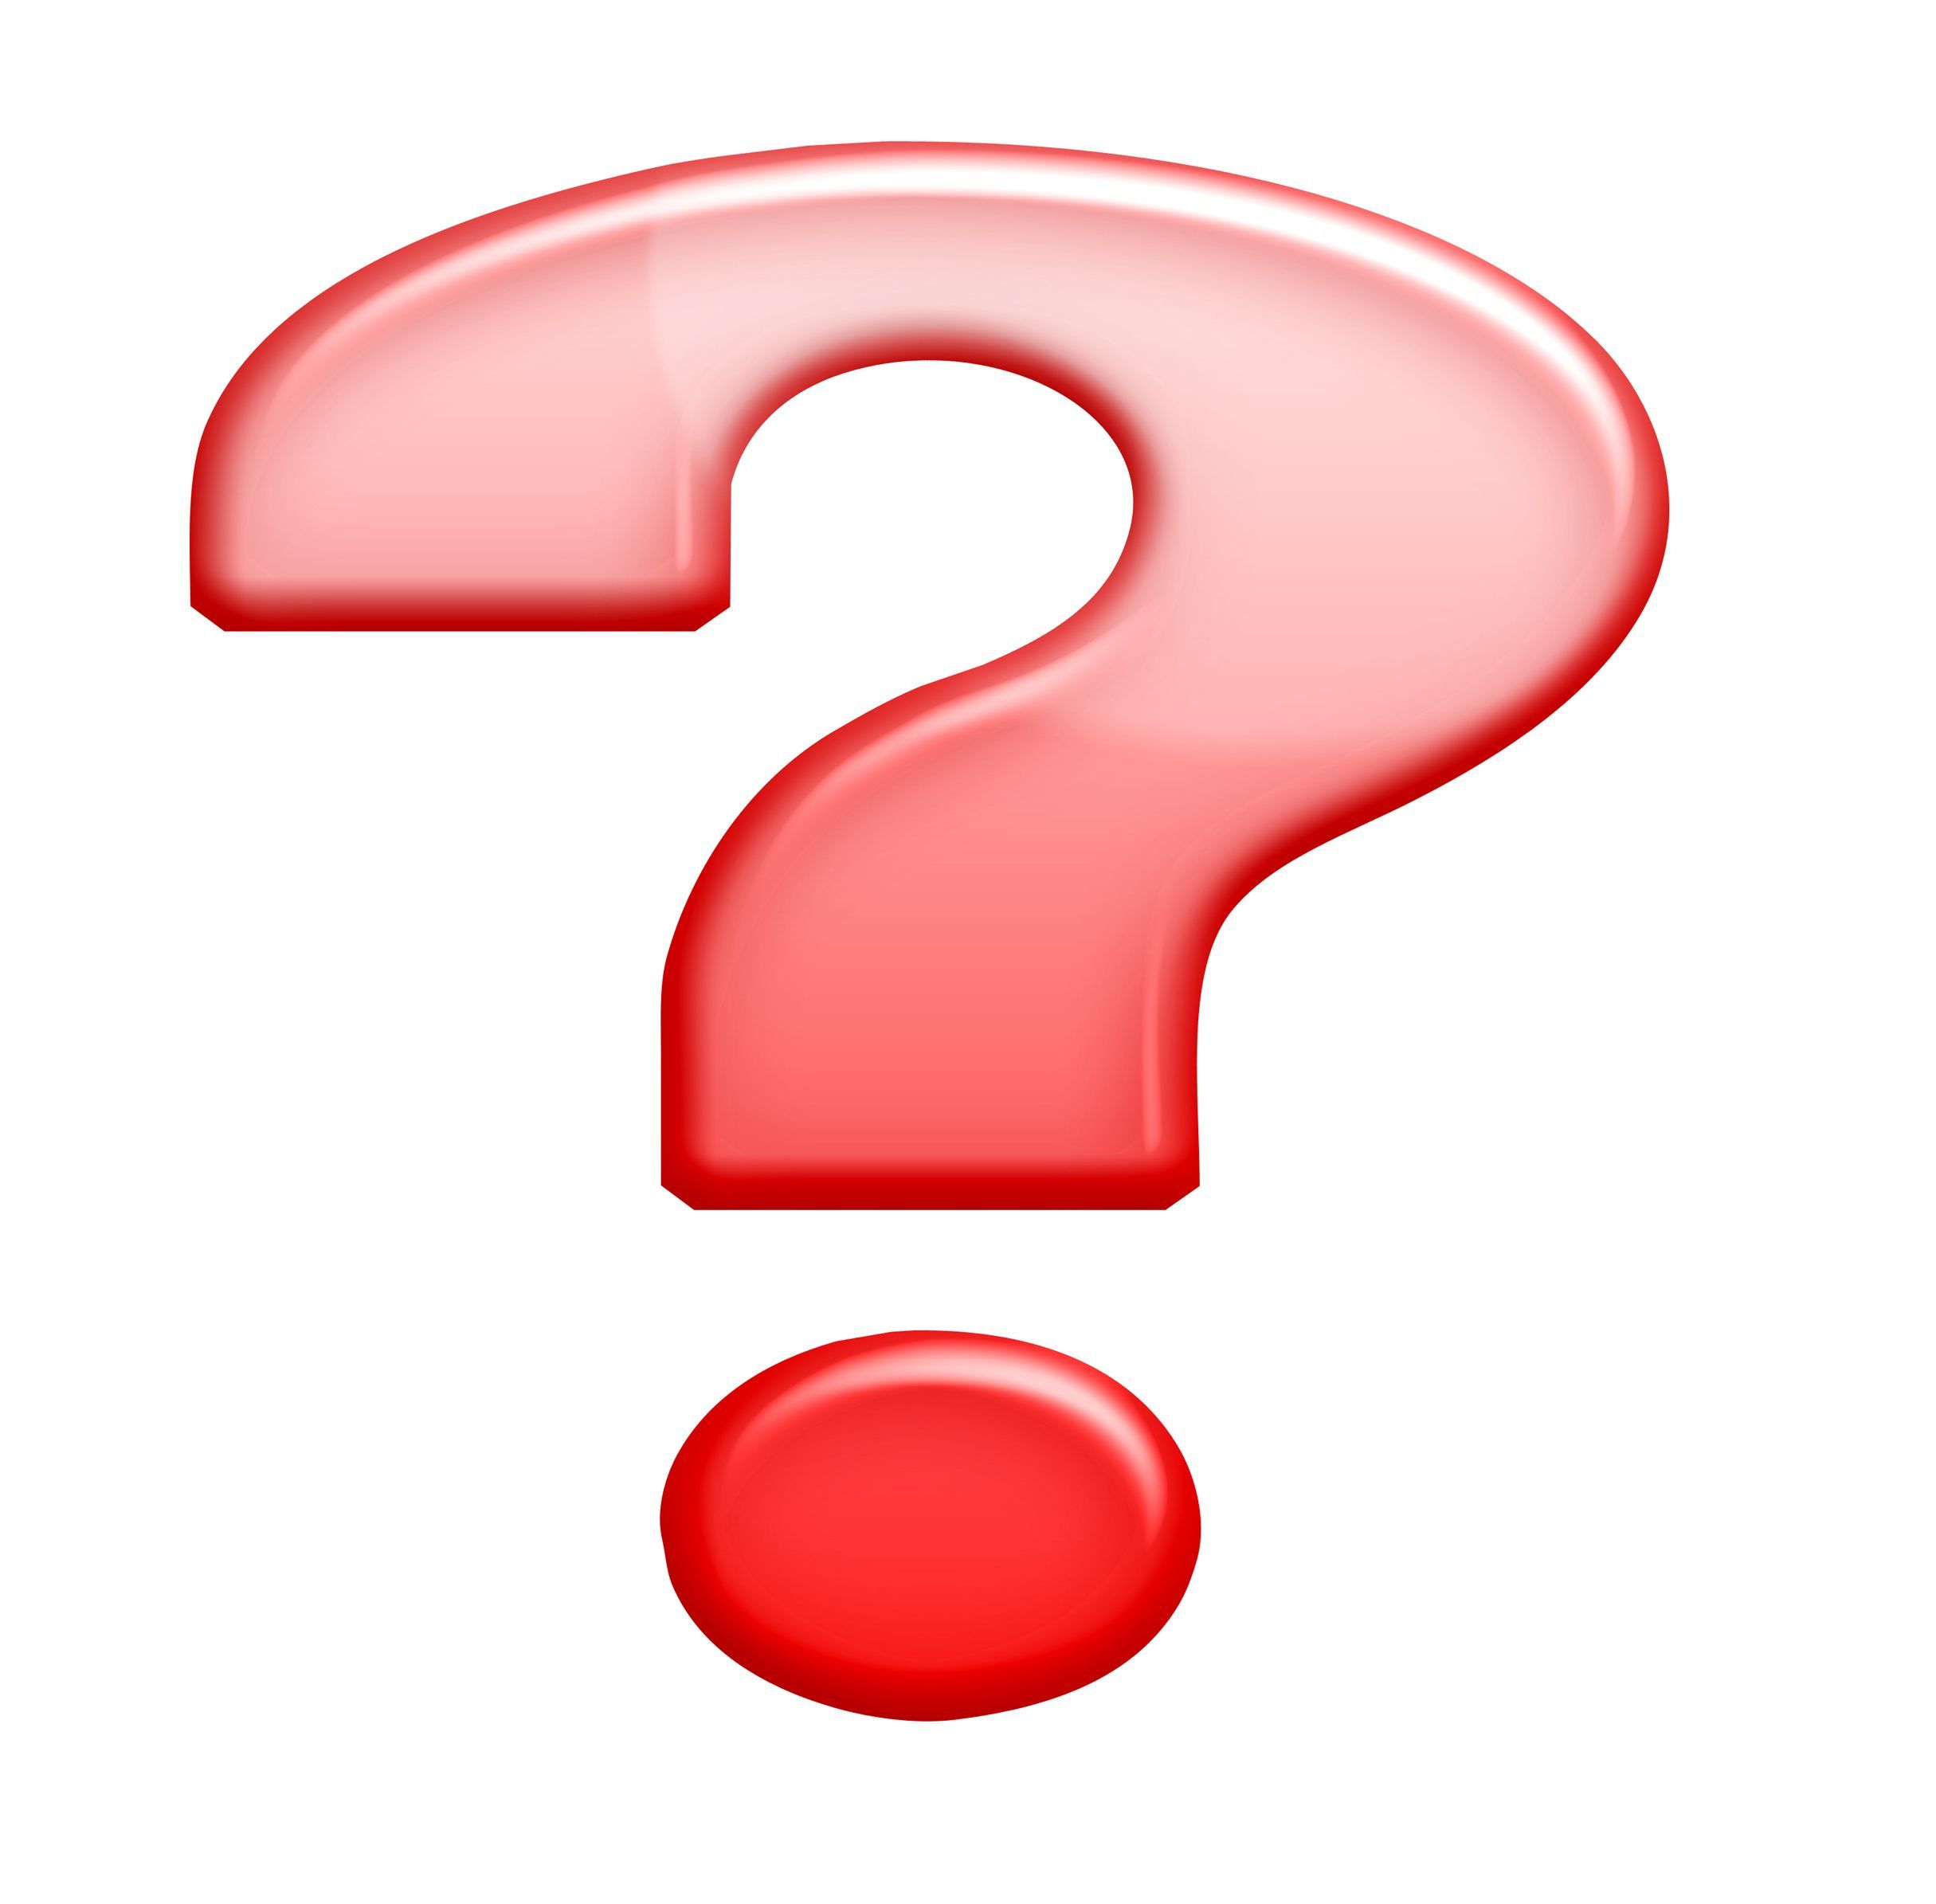 Images Of Question Marks - ClipArt Best